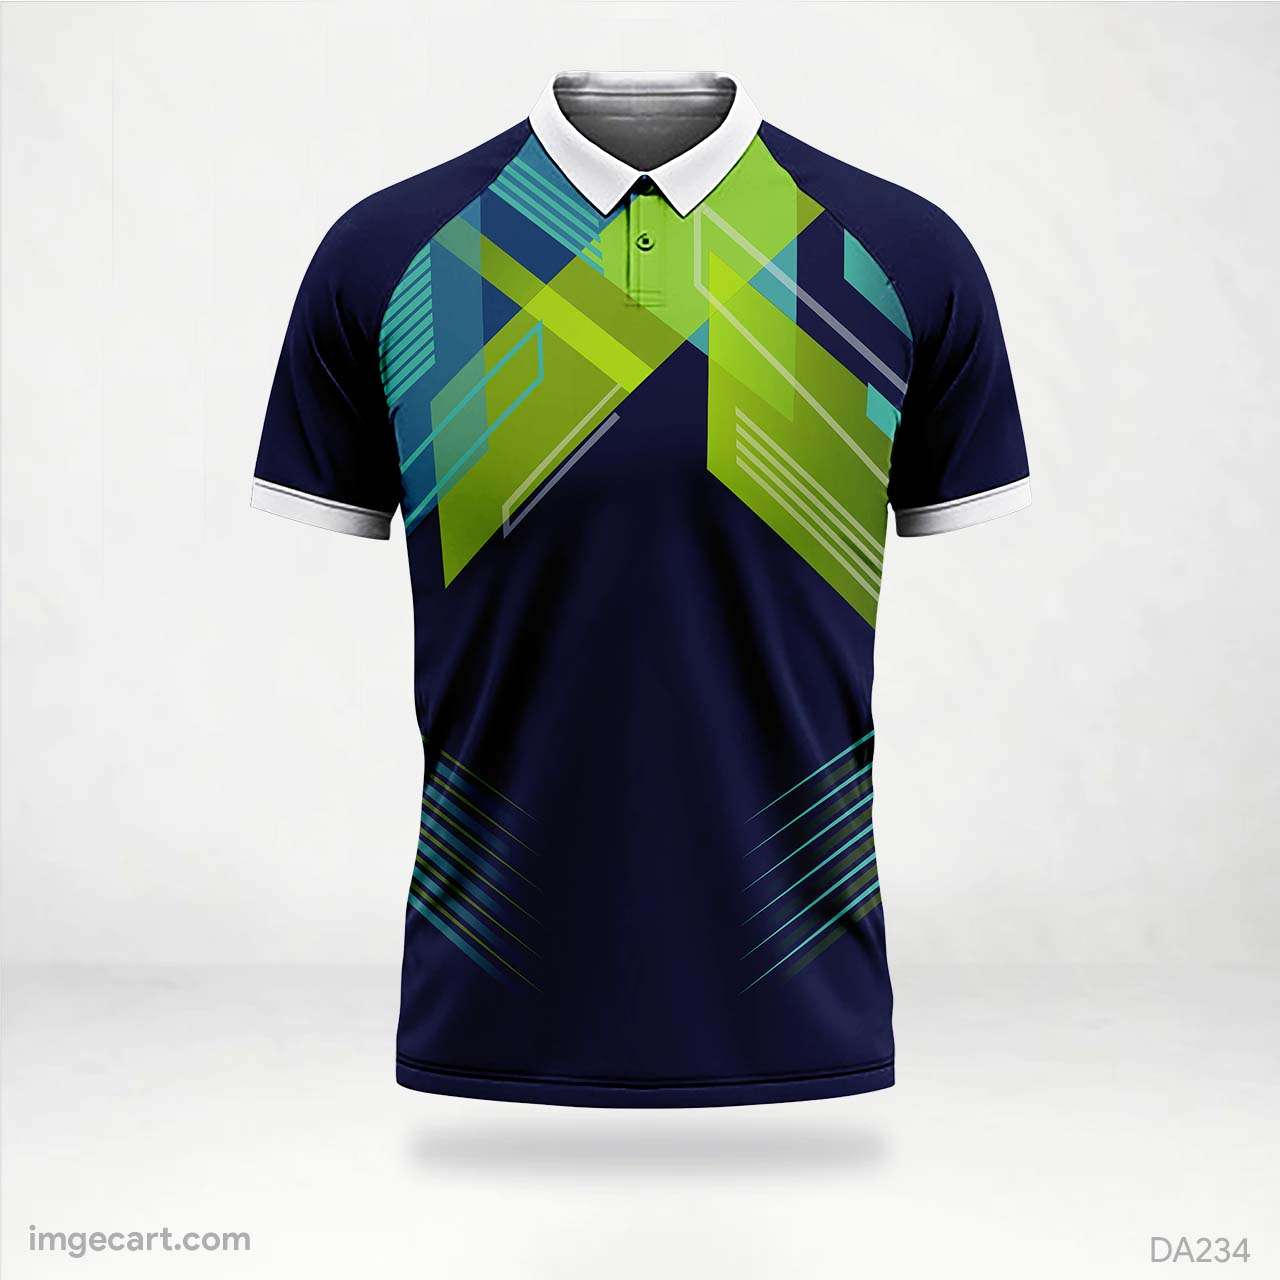 Volleyball Jersey Design Navy blue with Green Pattern - imgecart